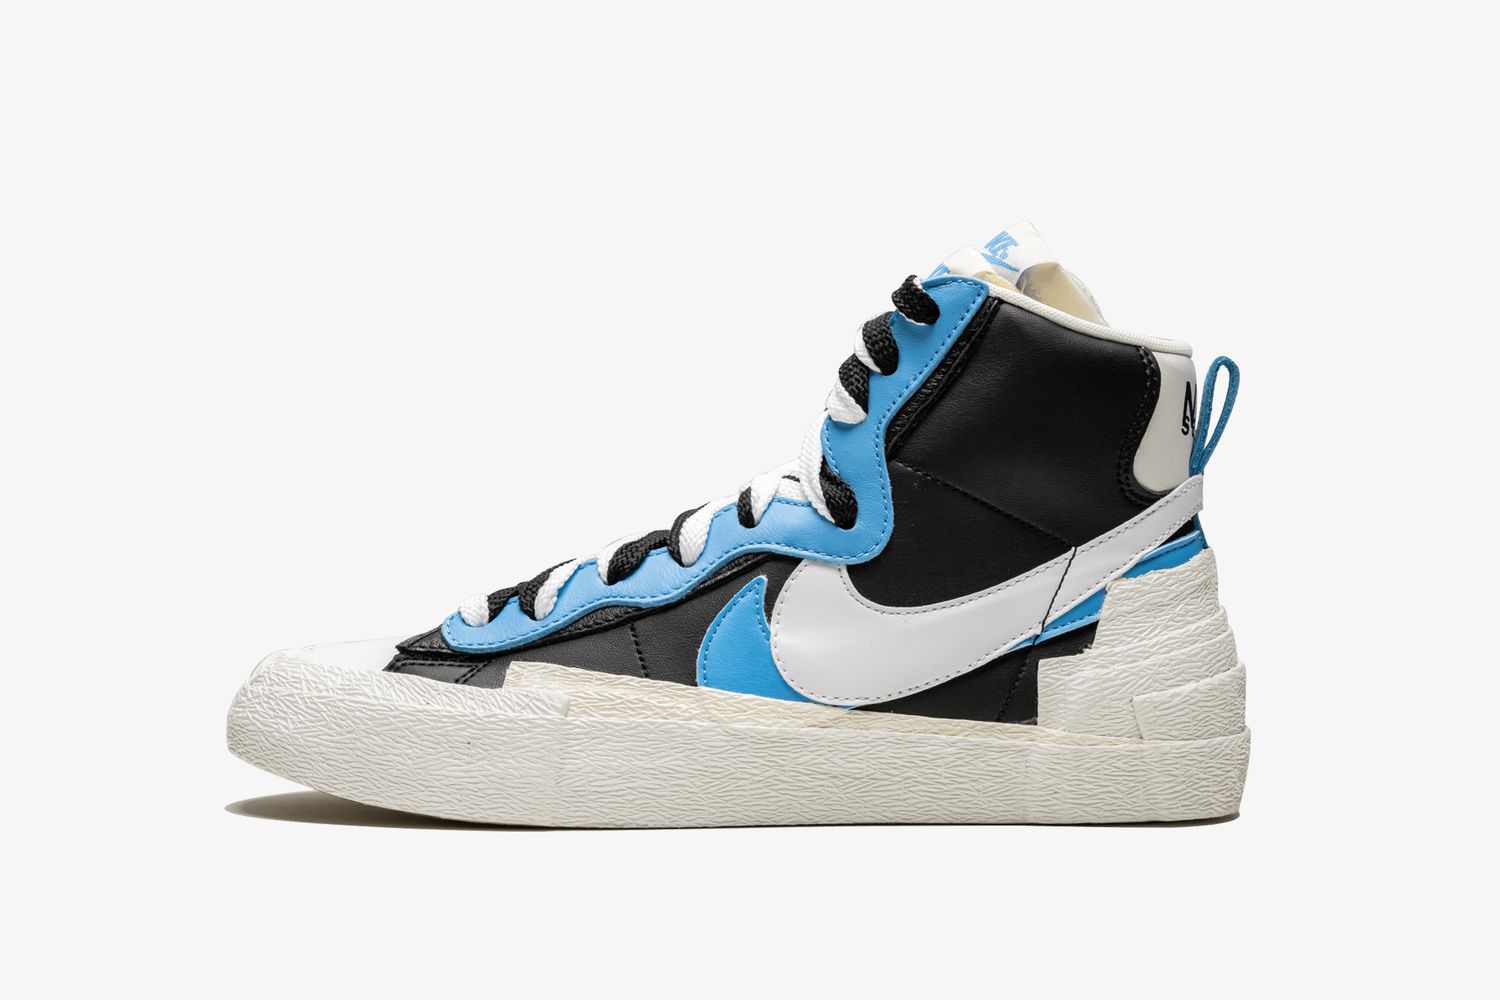 Democratic Party London Fortress Shop Our Favorite Nike Blazer Sneakers Here